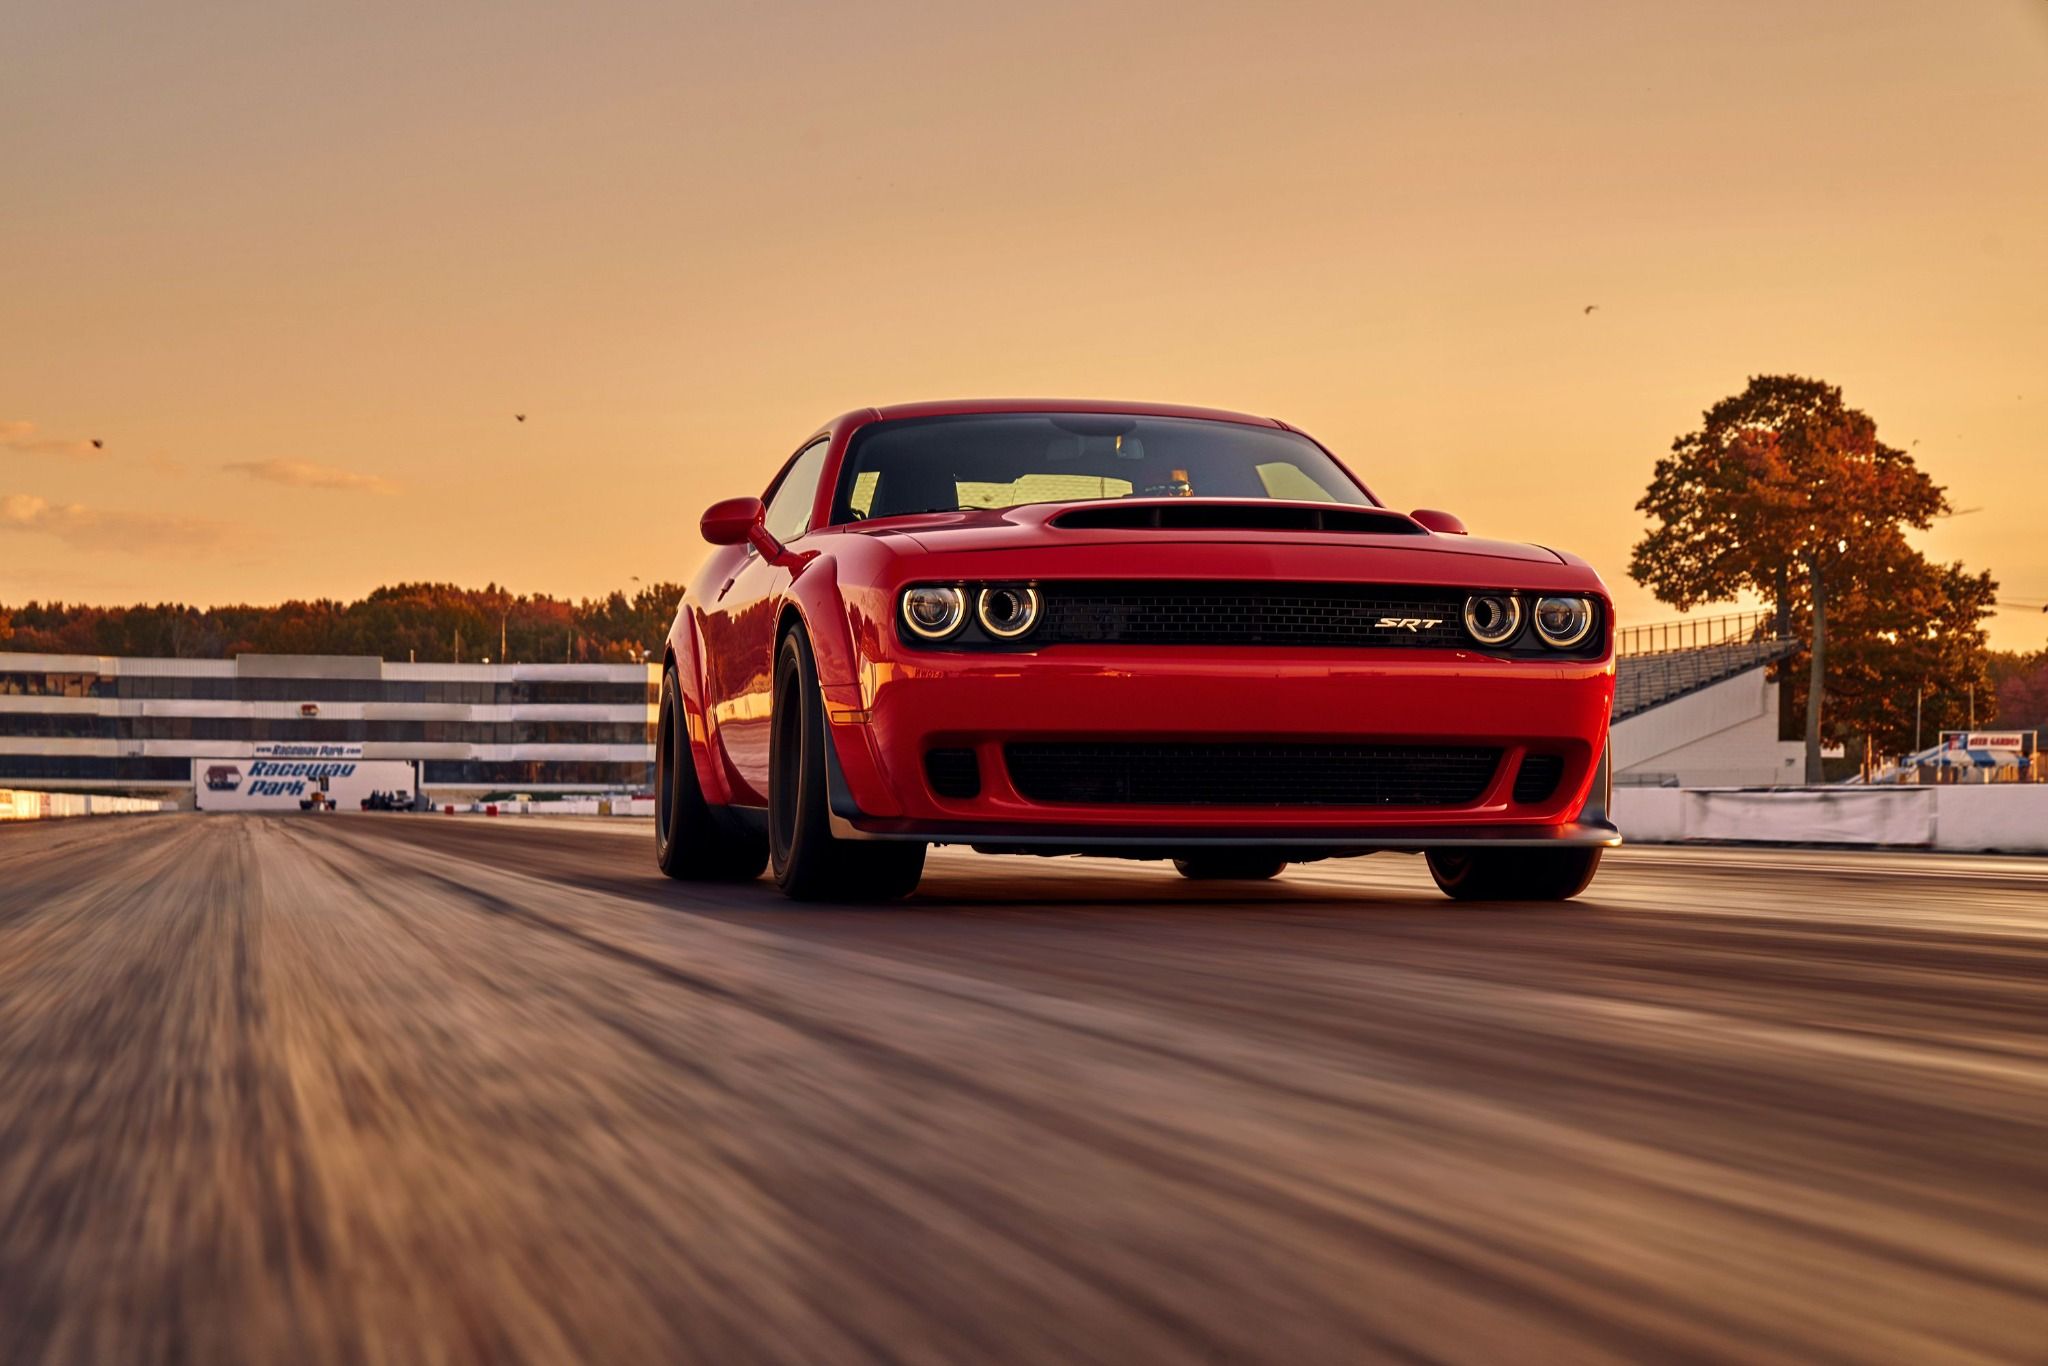 Front view of a Dodge Demon driving down the road